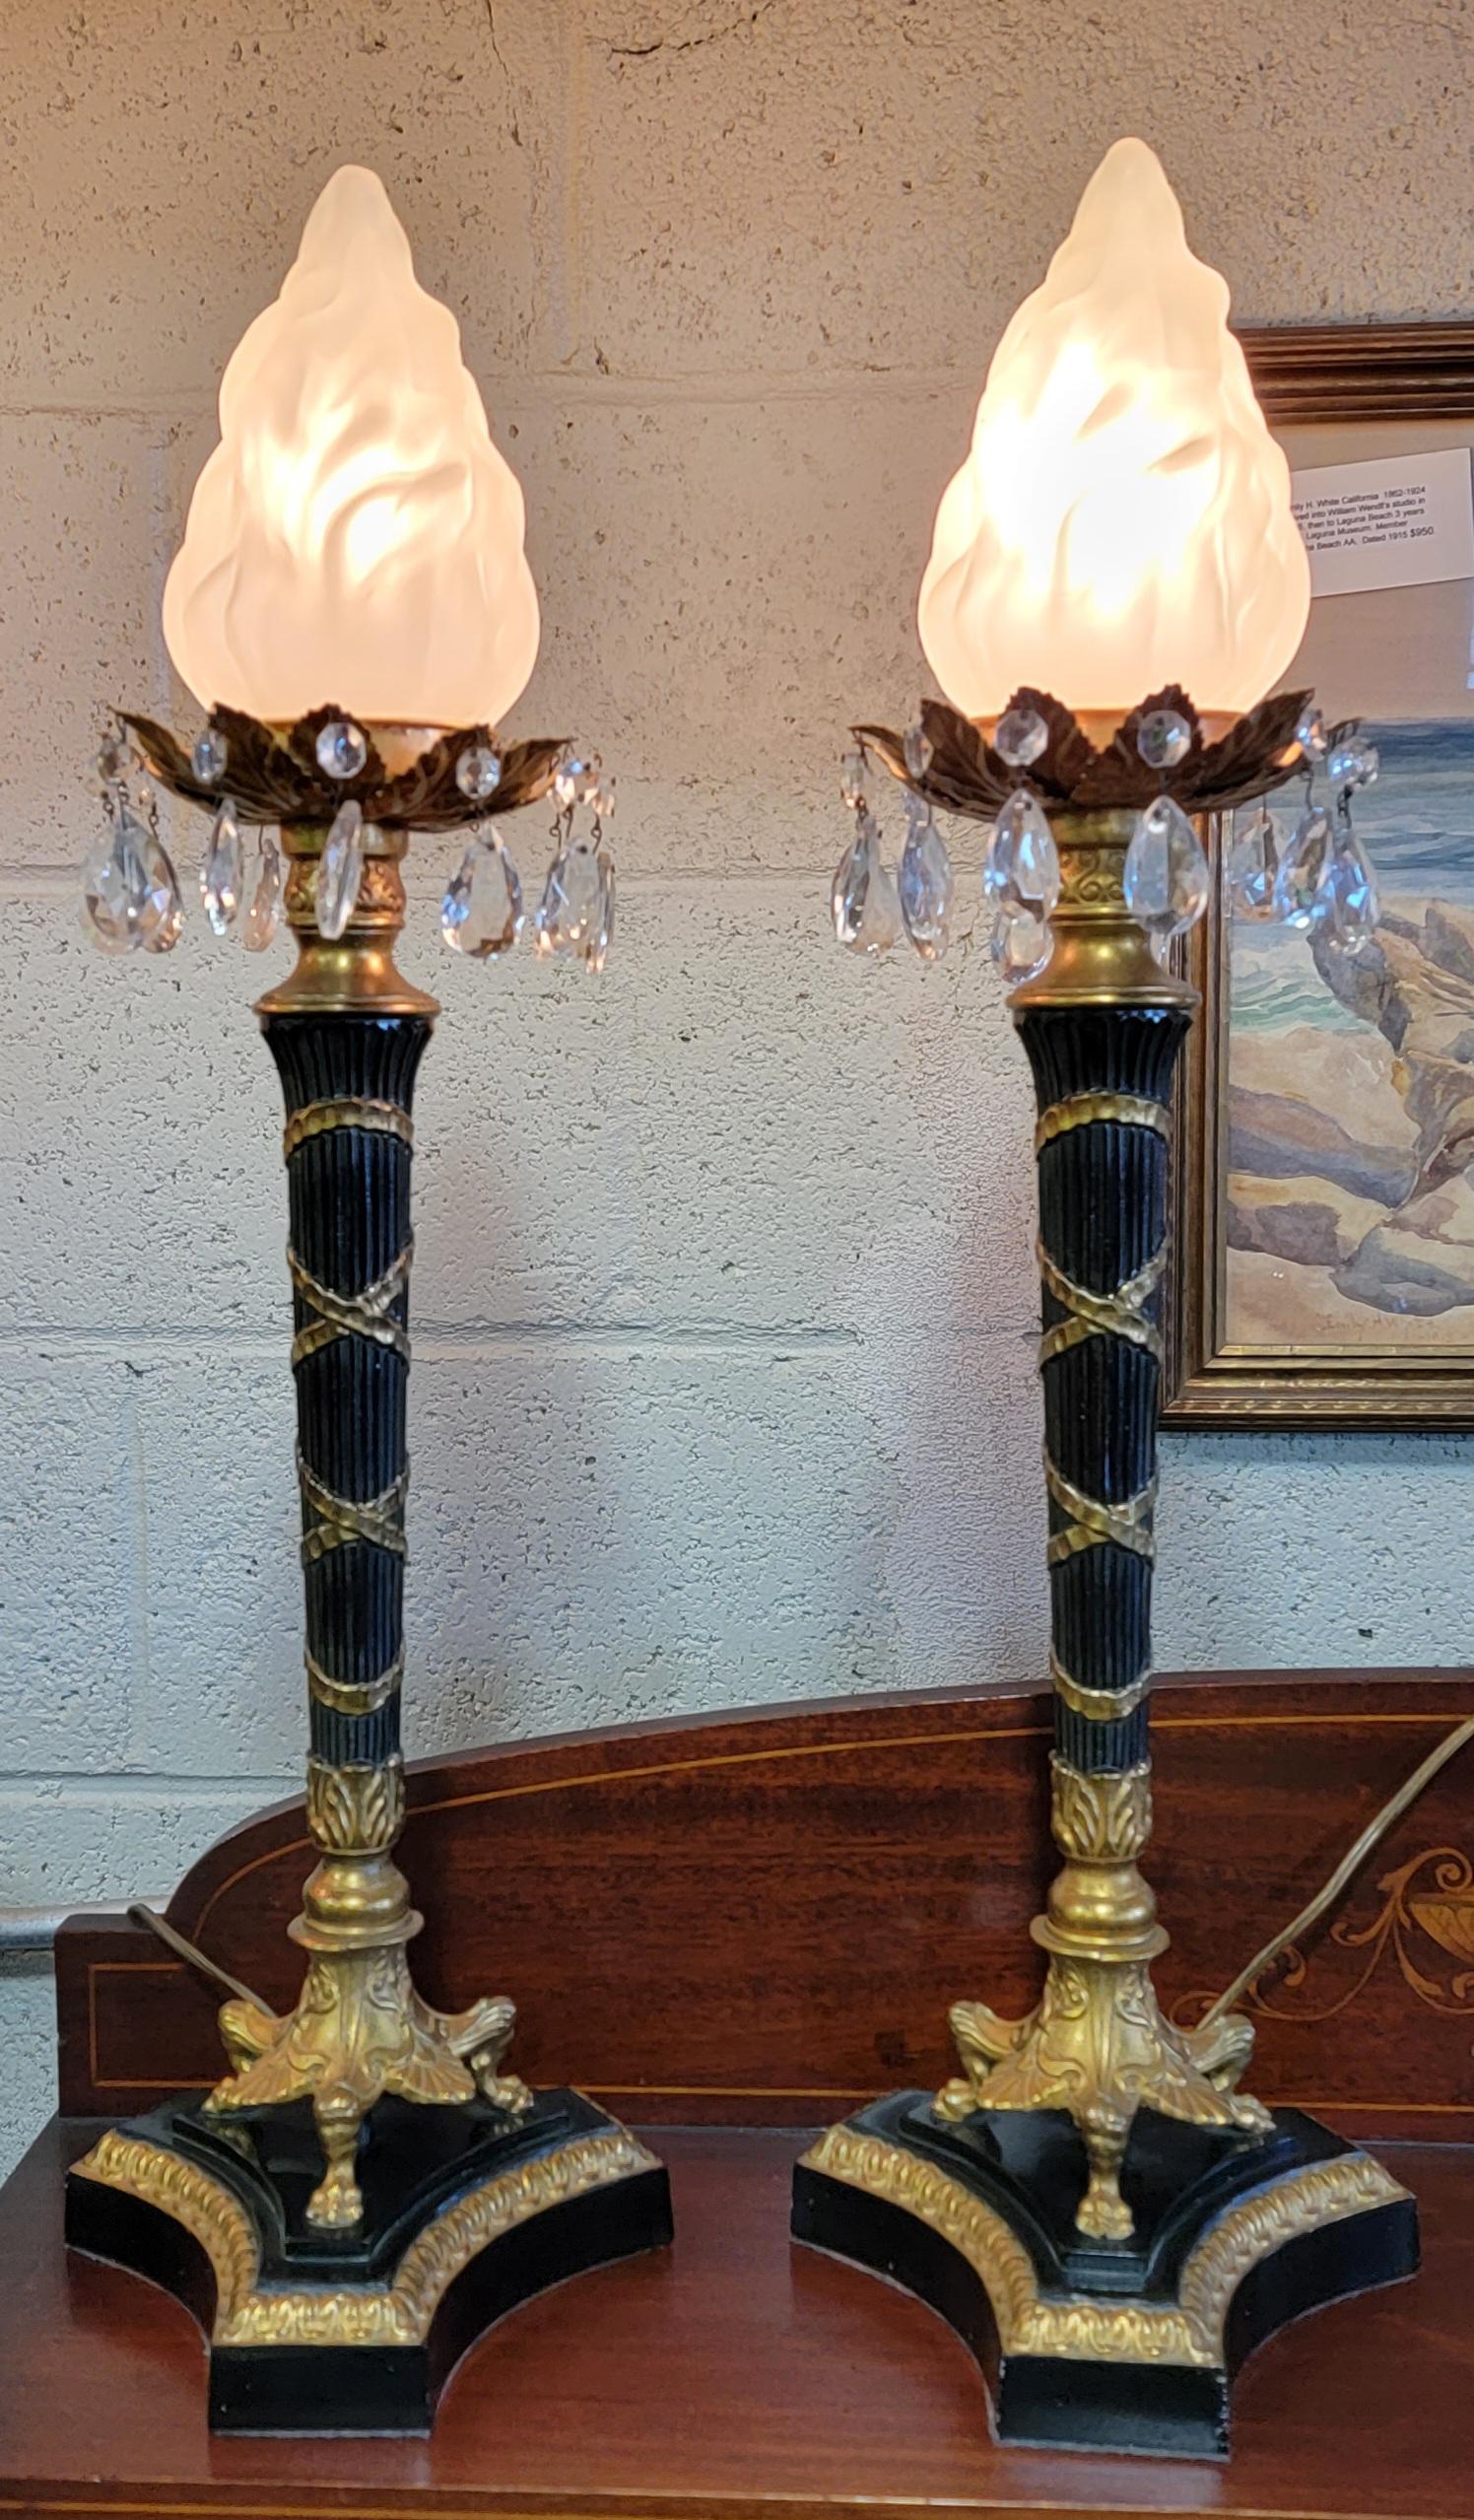 Striking pair of Neoclassical table lamps. Crystal teardrop prisms surround frosted glass flame shades. Draped candlestick style on footed base. Brass plate and painted metal construction. Mid 20th century. In fine working order.